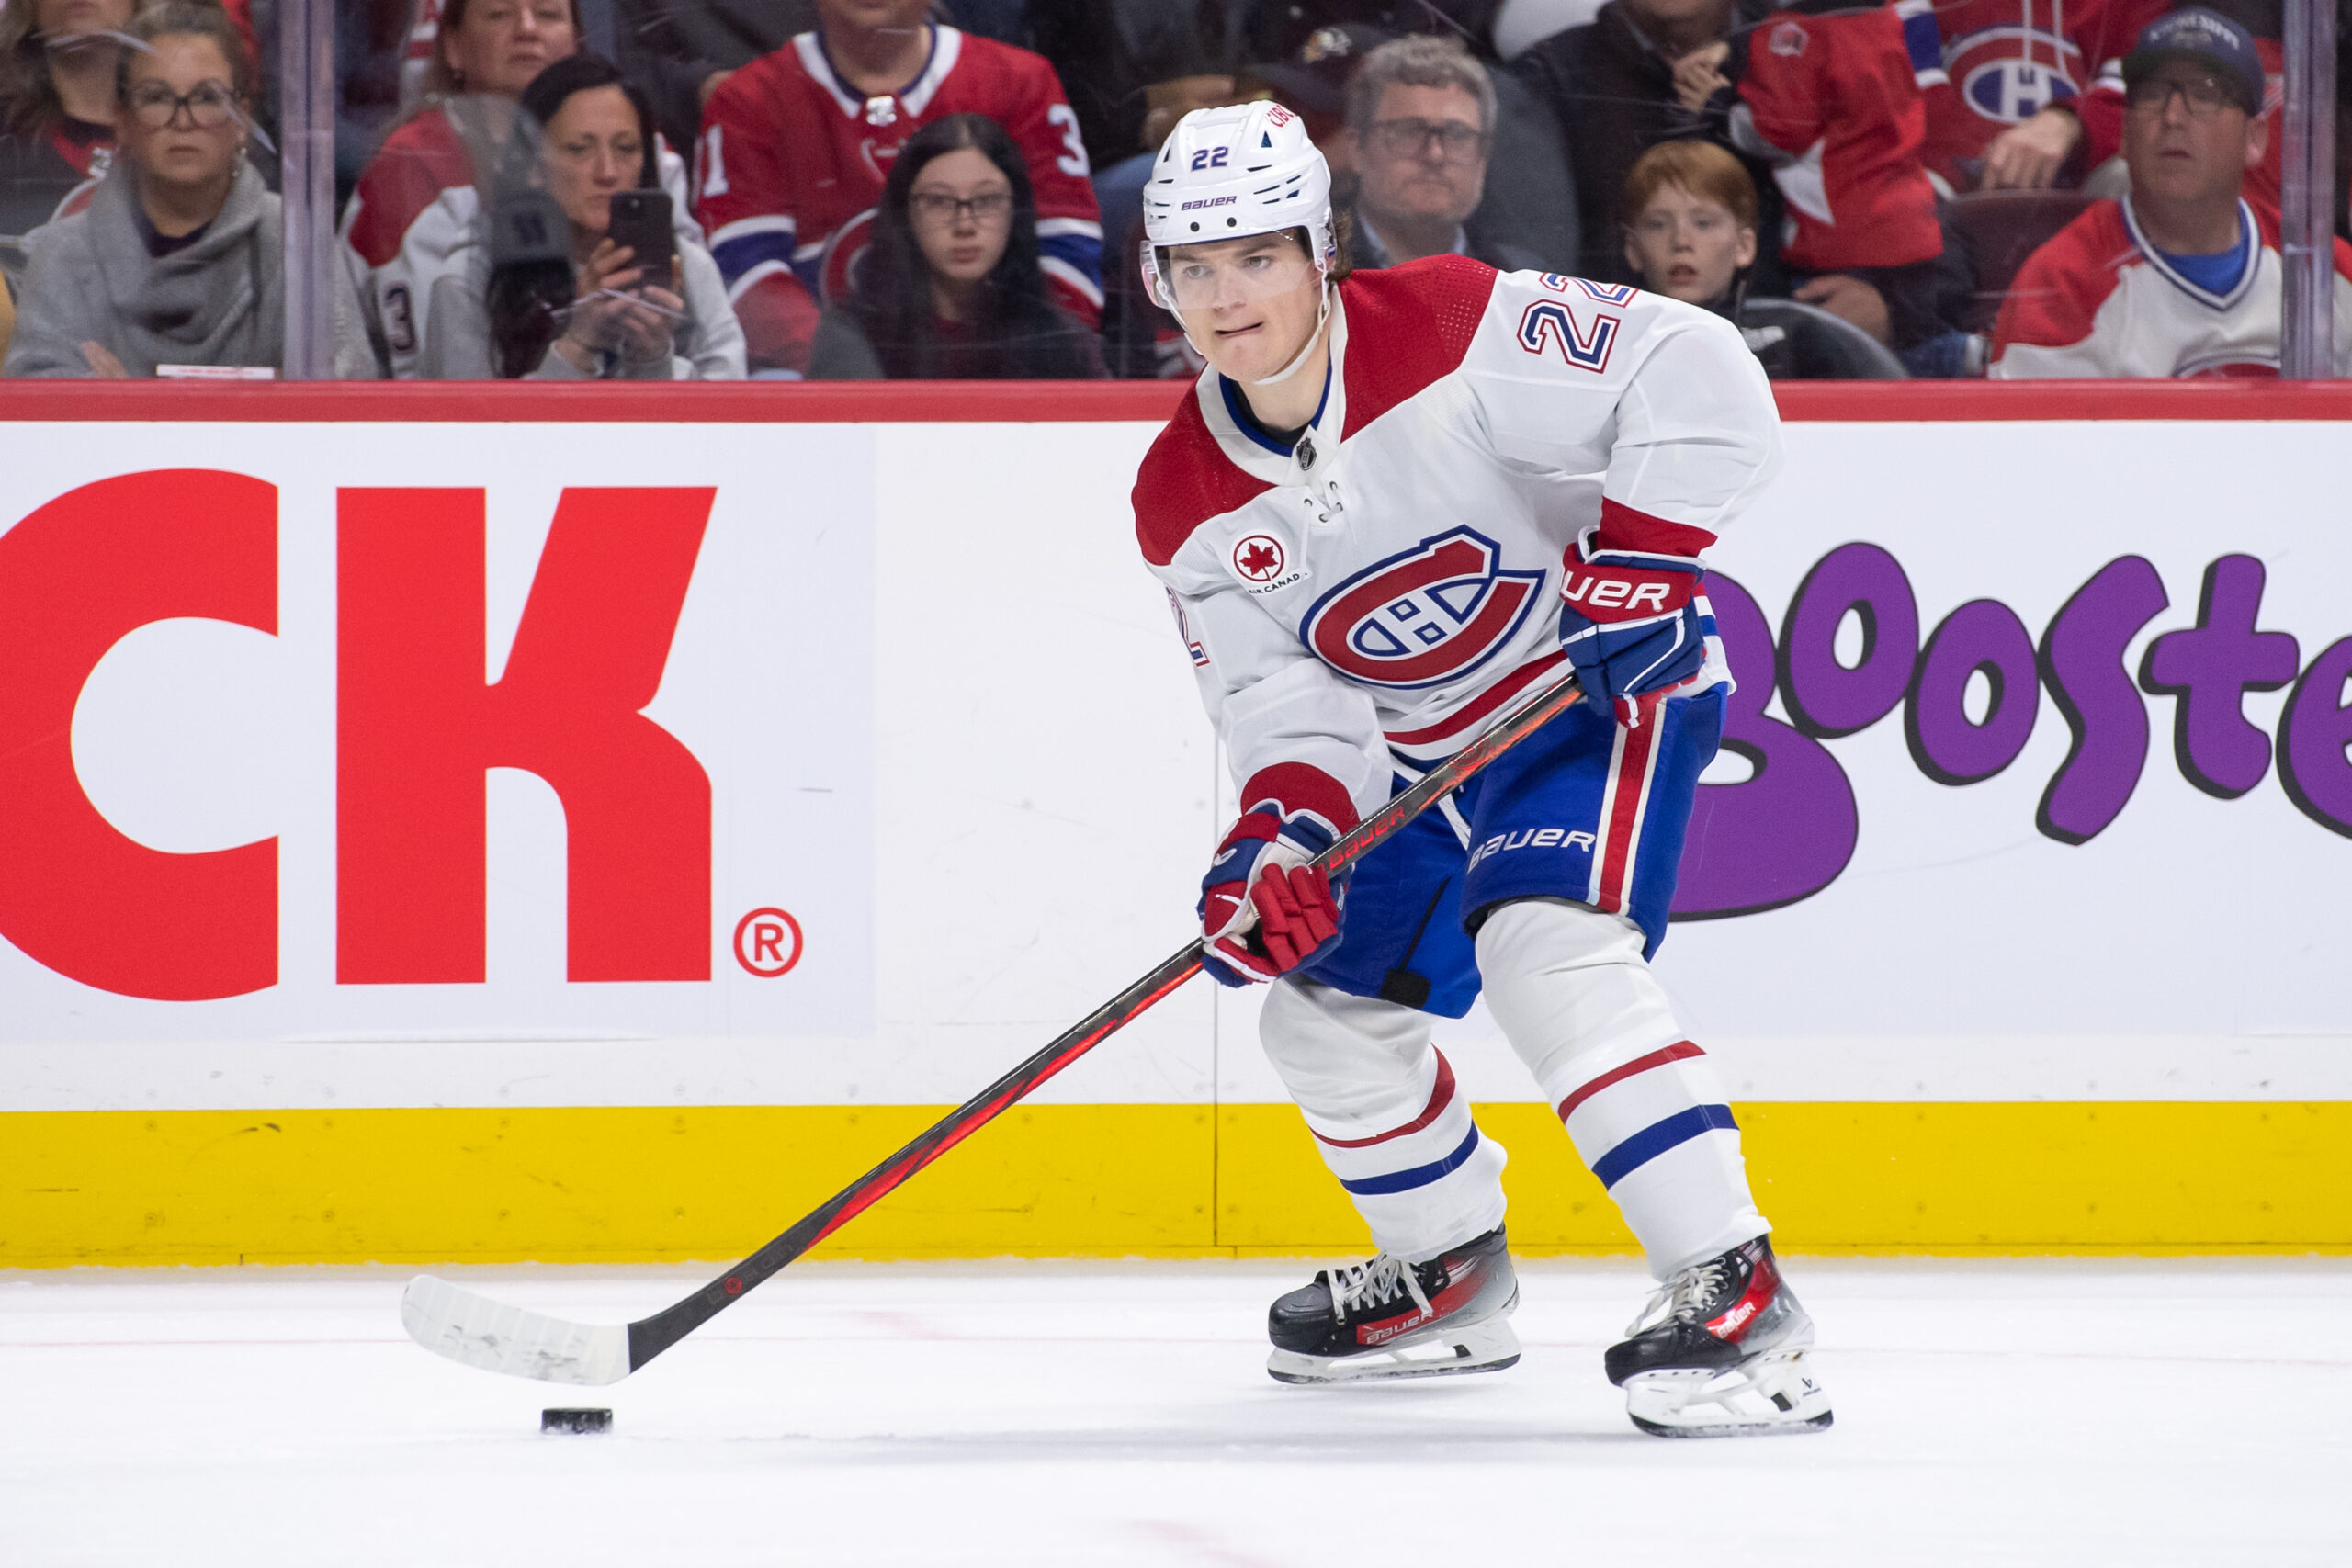 Cole Caufield's Season a Positive for the Canadiens